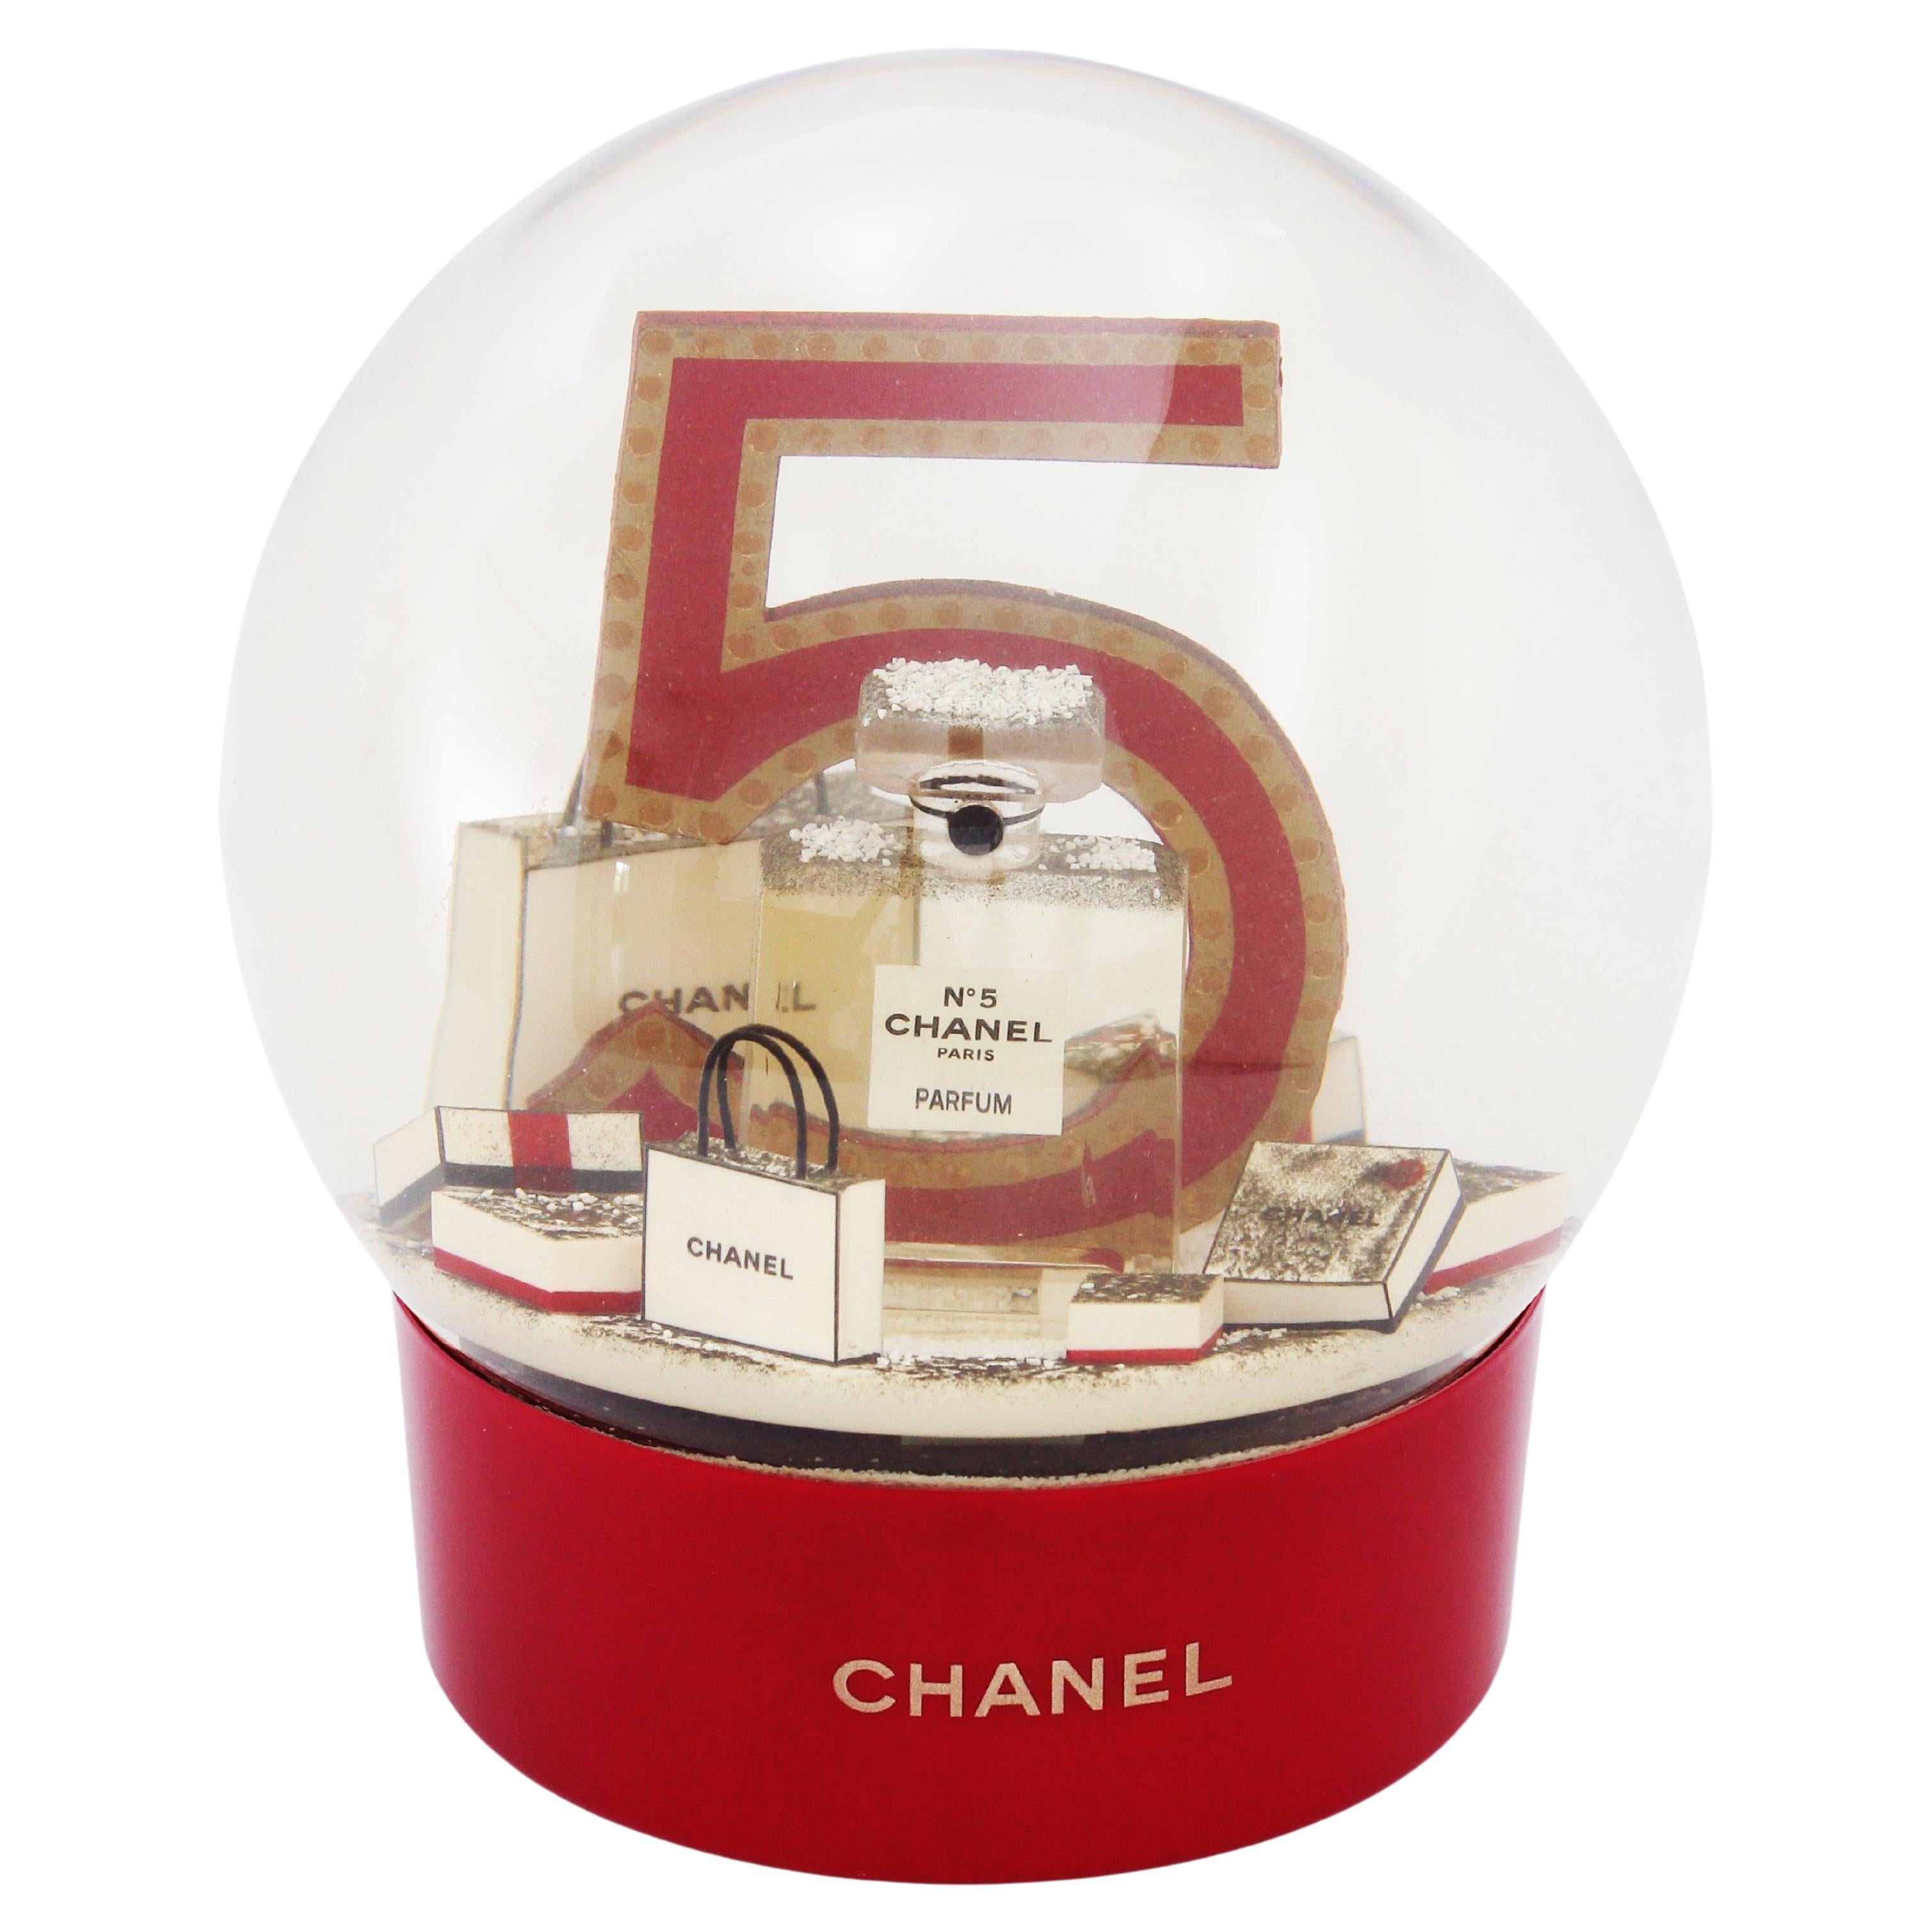 Chanel Snow Globe 2015 Large Shopping Bags No 5 Bottle Home Decor